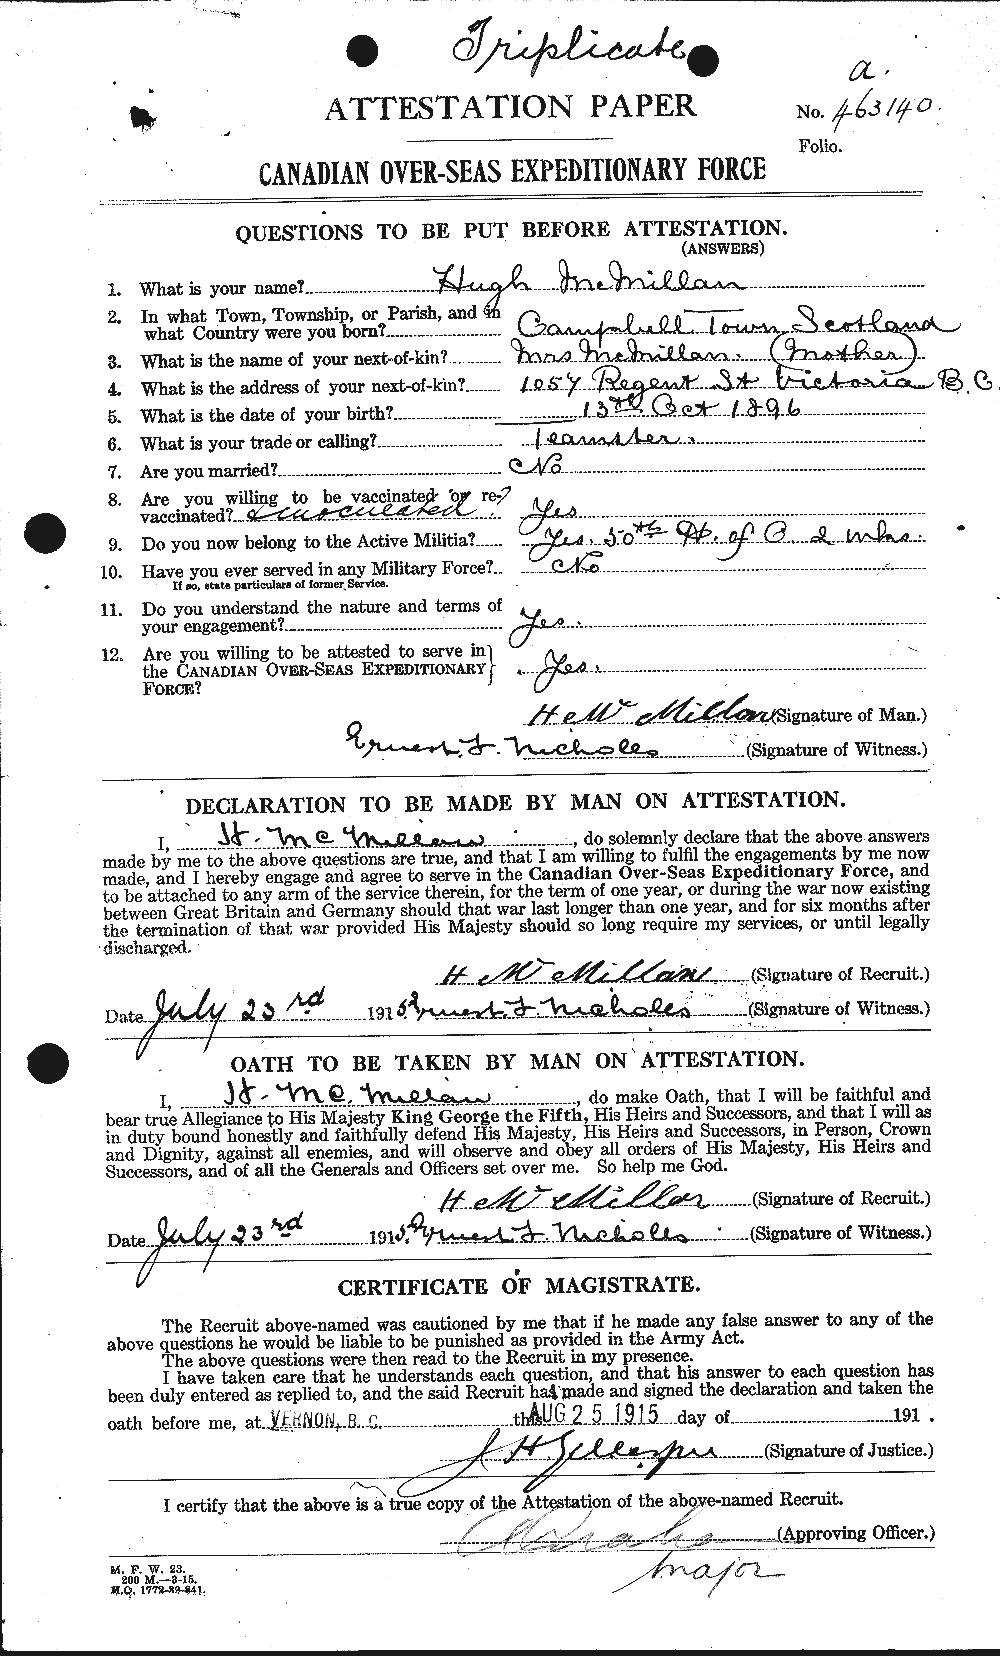 Personnel Records of the First World War - CEF 537756a